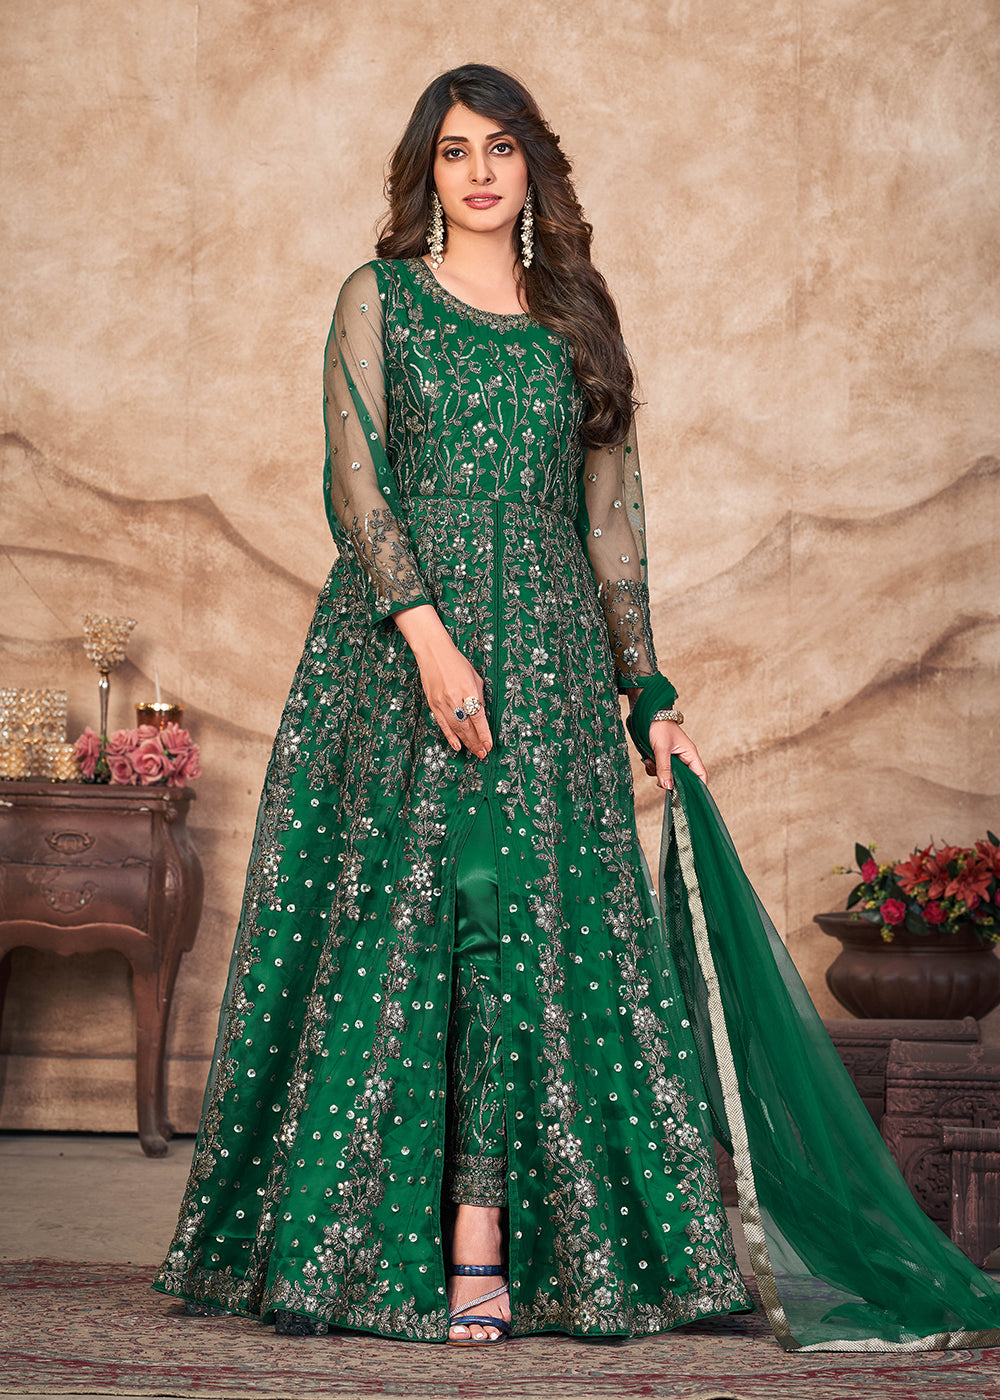 Buy Now Emerald Green Net Embroidered Pant Style Anarkali Suit Online in USA, UK, Australia, New Zealand, Canada & Worldwide at Empress Clothing. 